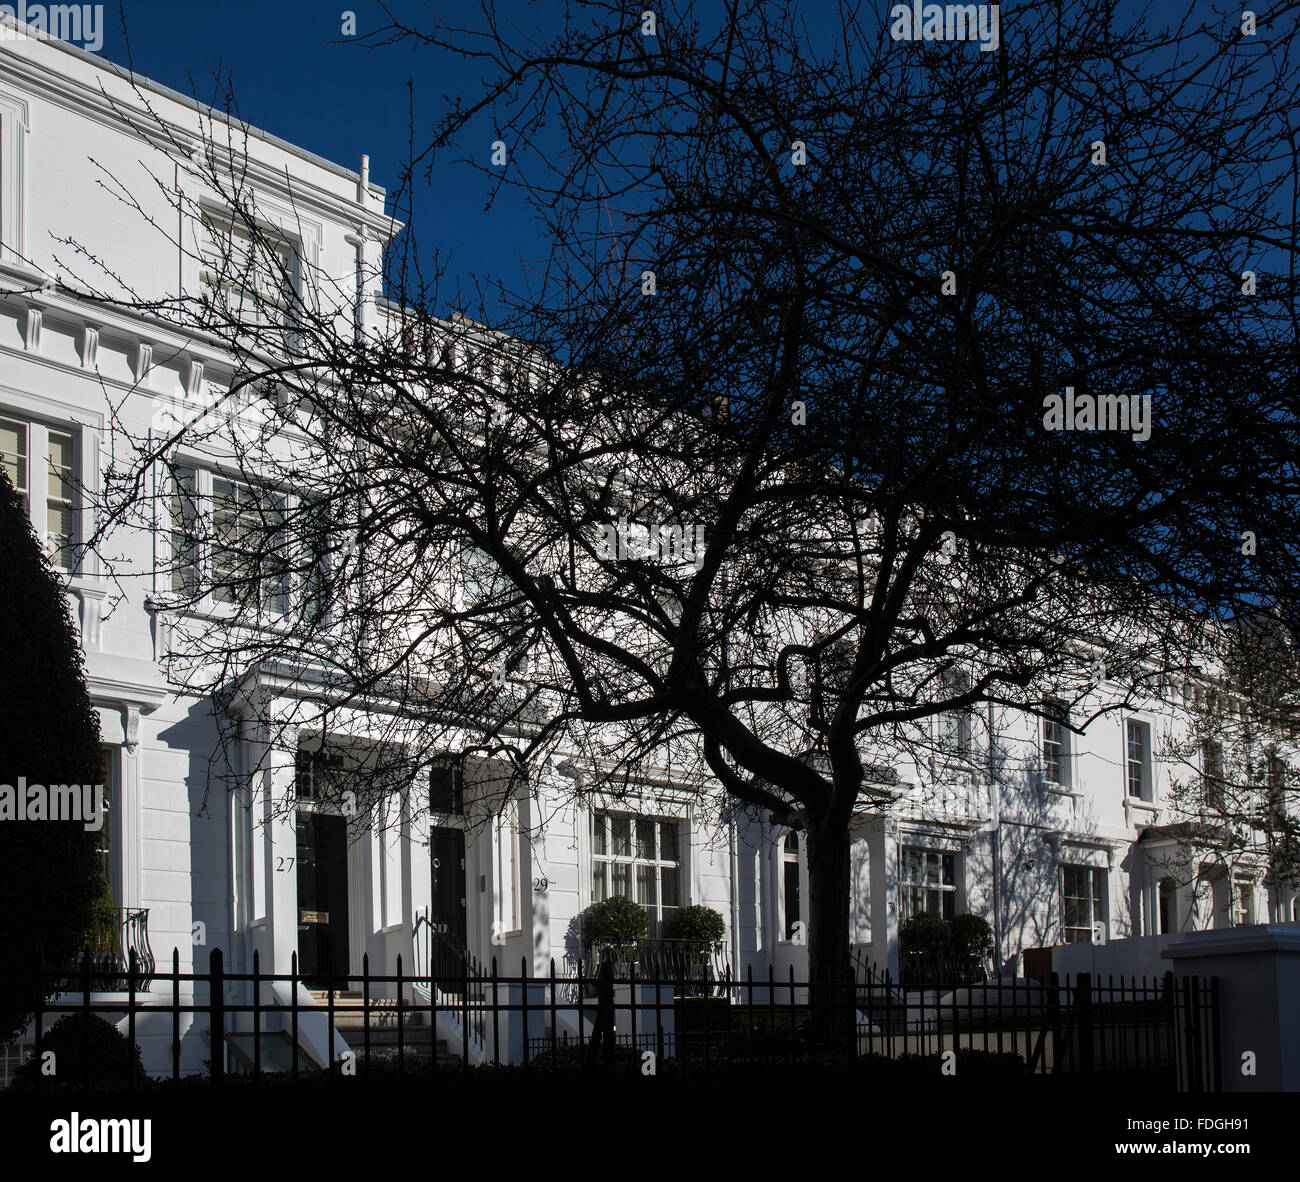 Residential Picture of Southwest London. Somehwere between Sloane Square and South Kensington. Stock Photo